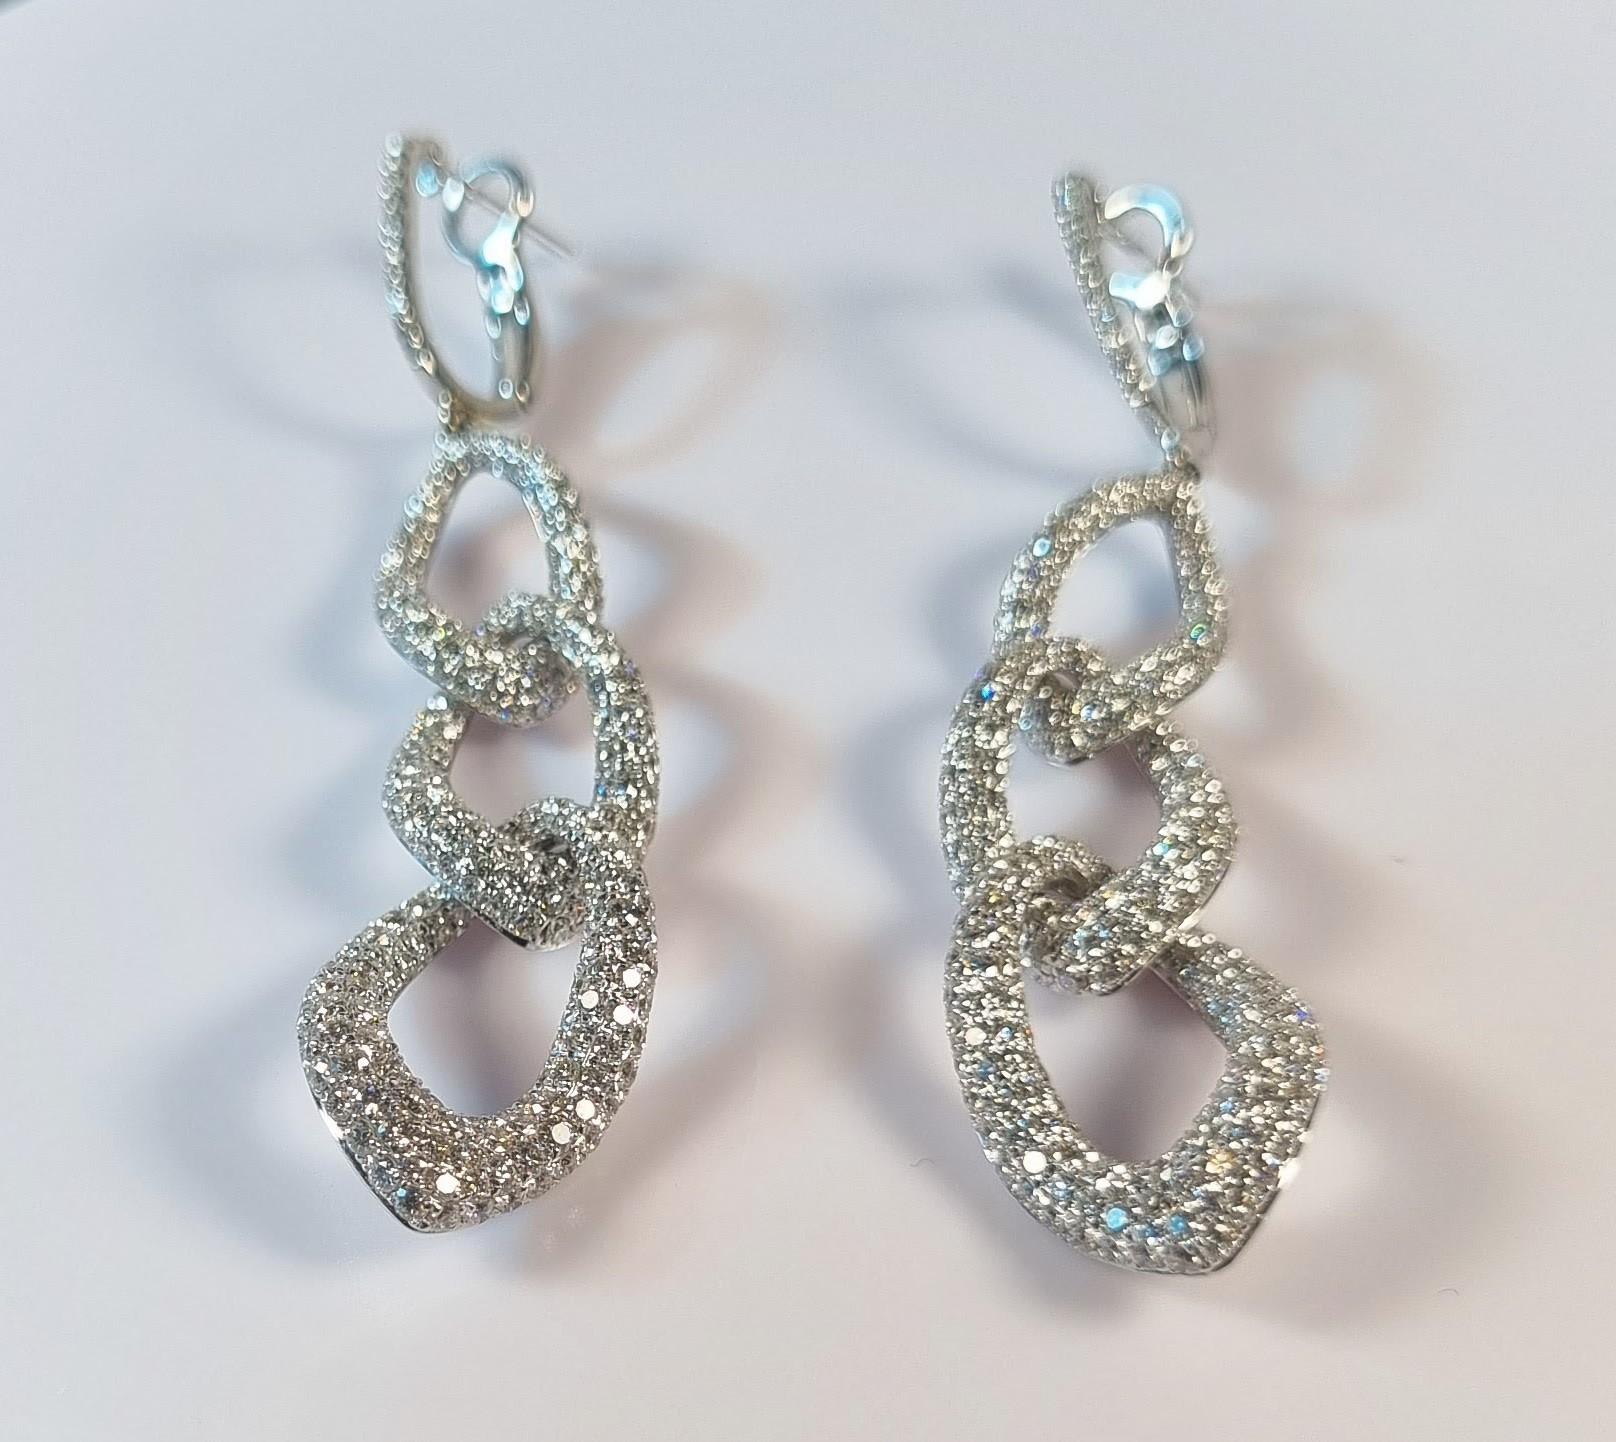 Long earrings in white gold with pavée of diamonds in block chain sequence 
454  Diamonds total 4.43ct.
Diamond Quality  F/G VS
Length 80mm / 3.14in.
Weight 13.66gr total the two
Irama Pradera is a Young designer from Spain that searches always for